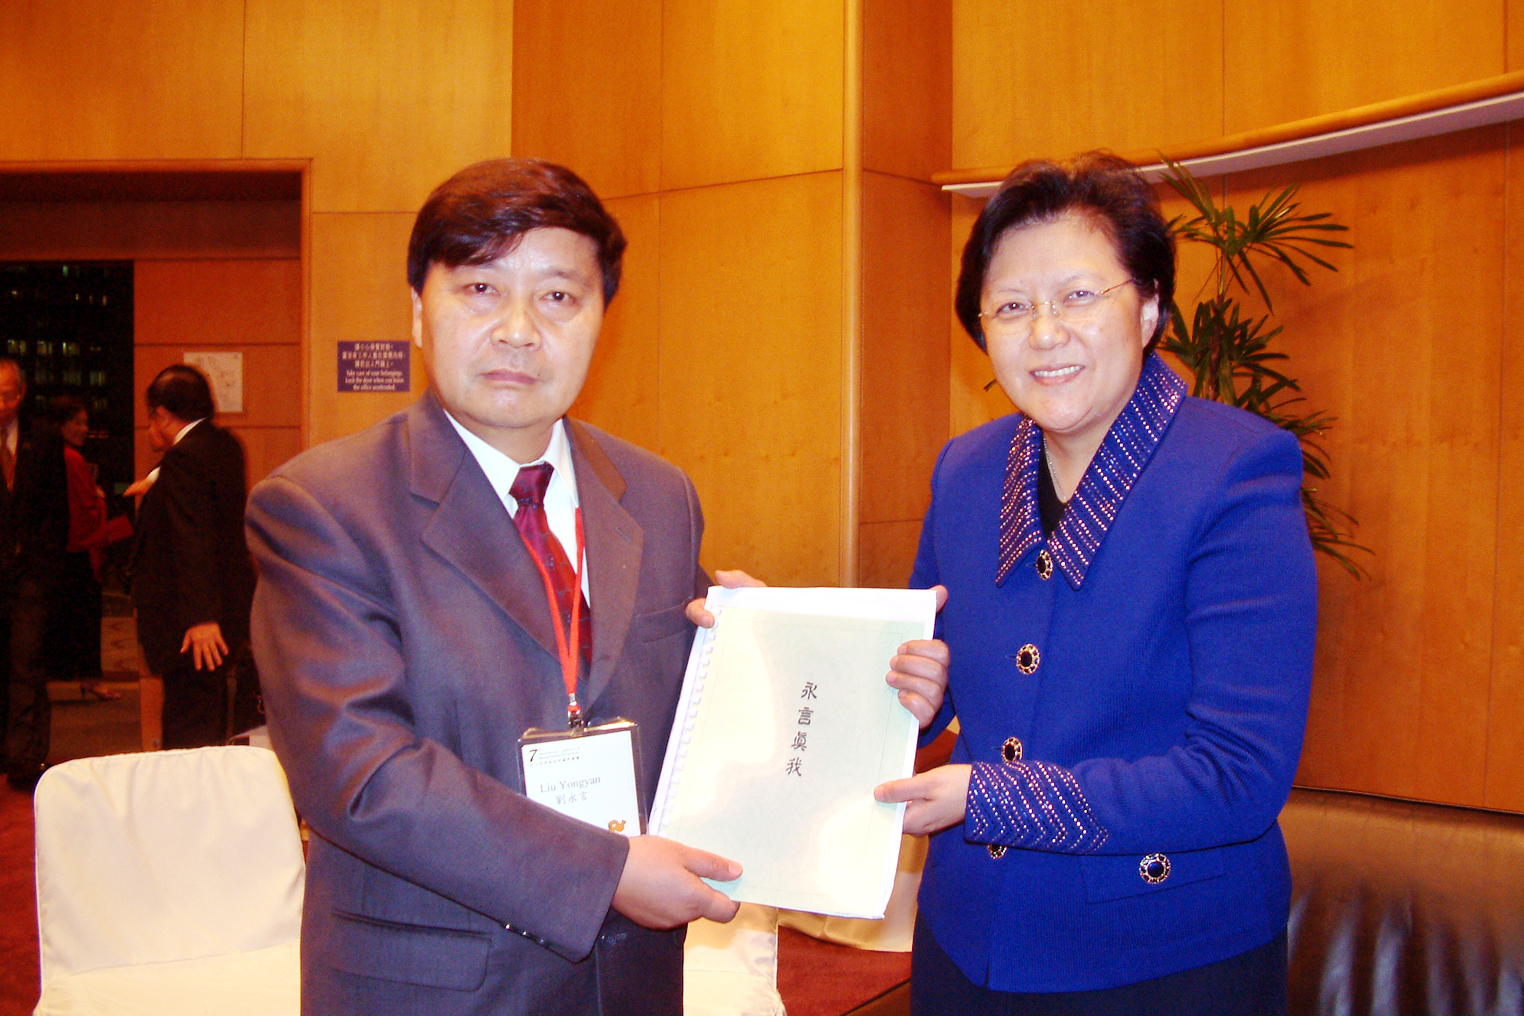 Accepting a gift of poetry from Rita Fan, the Chairman of the Hong Kong Legislative Council